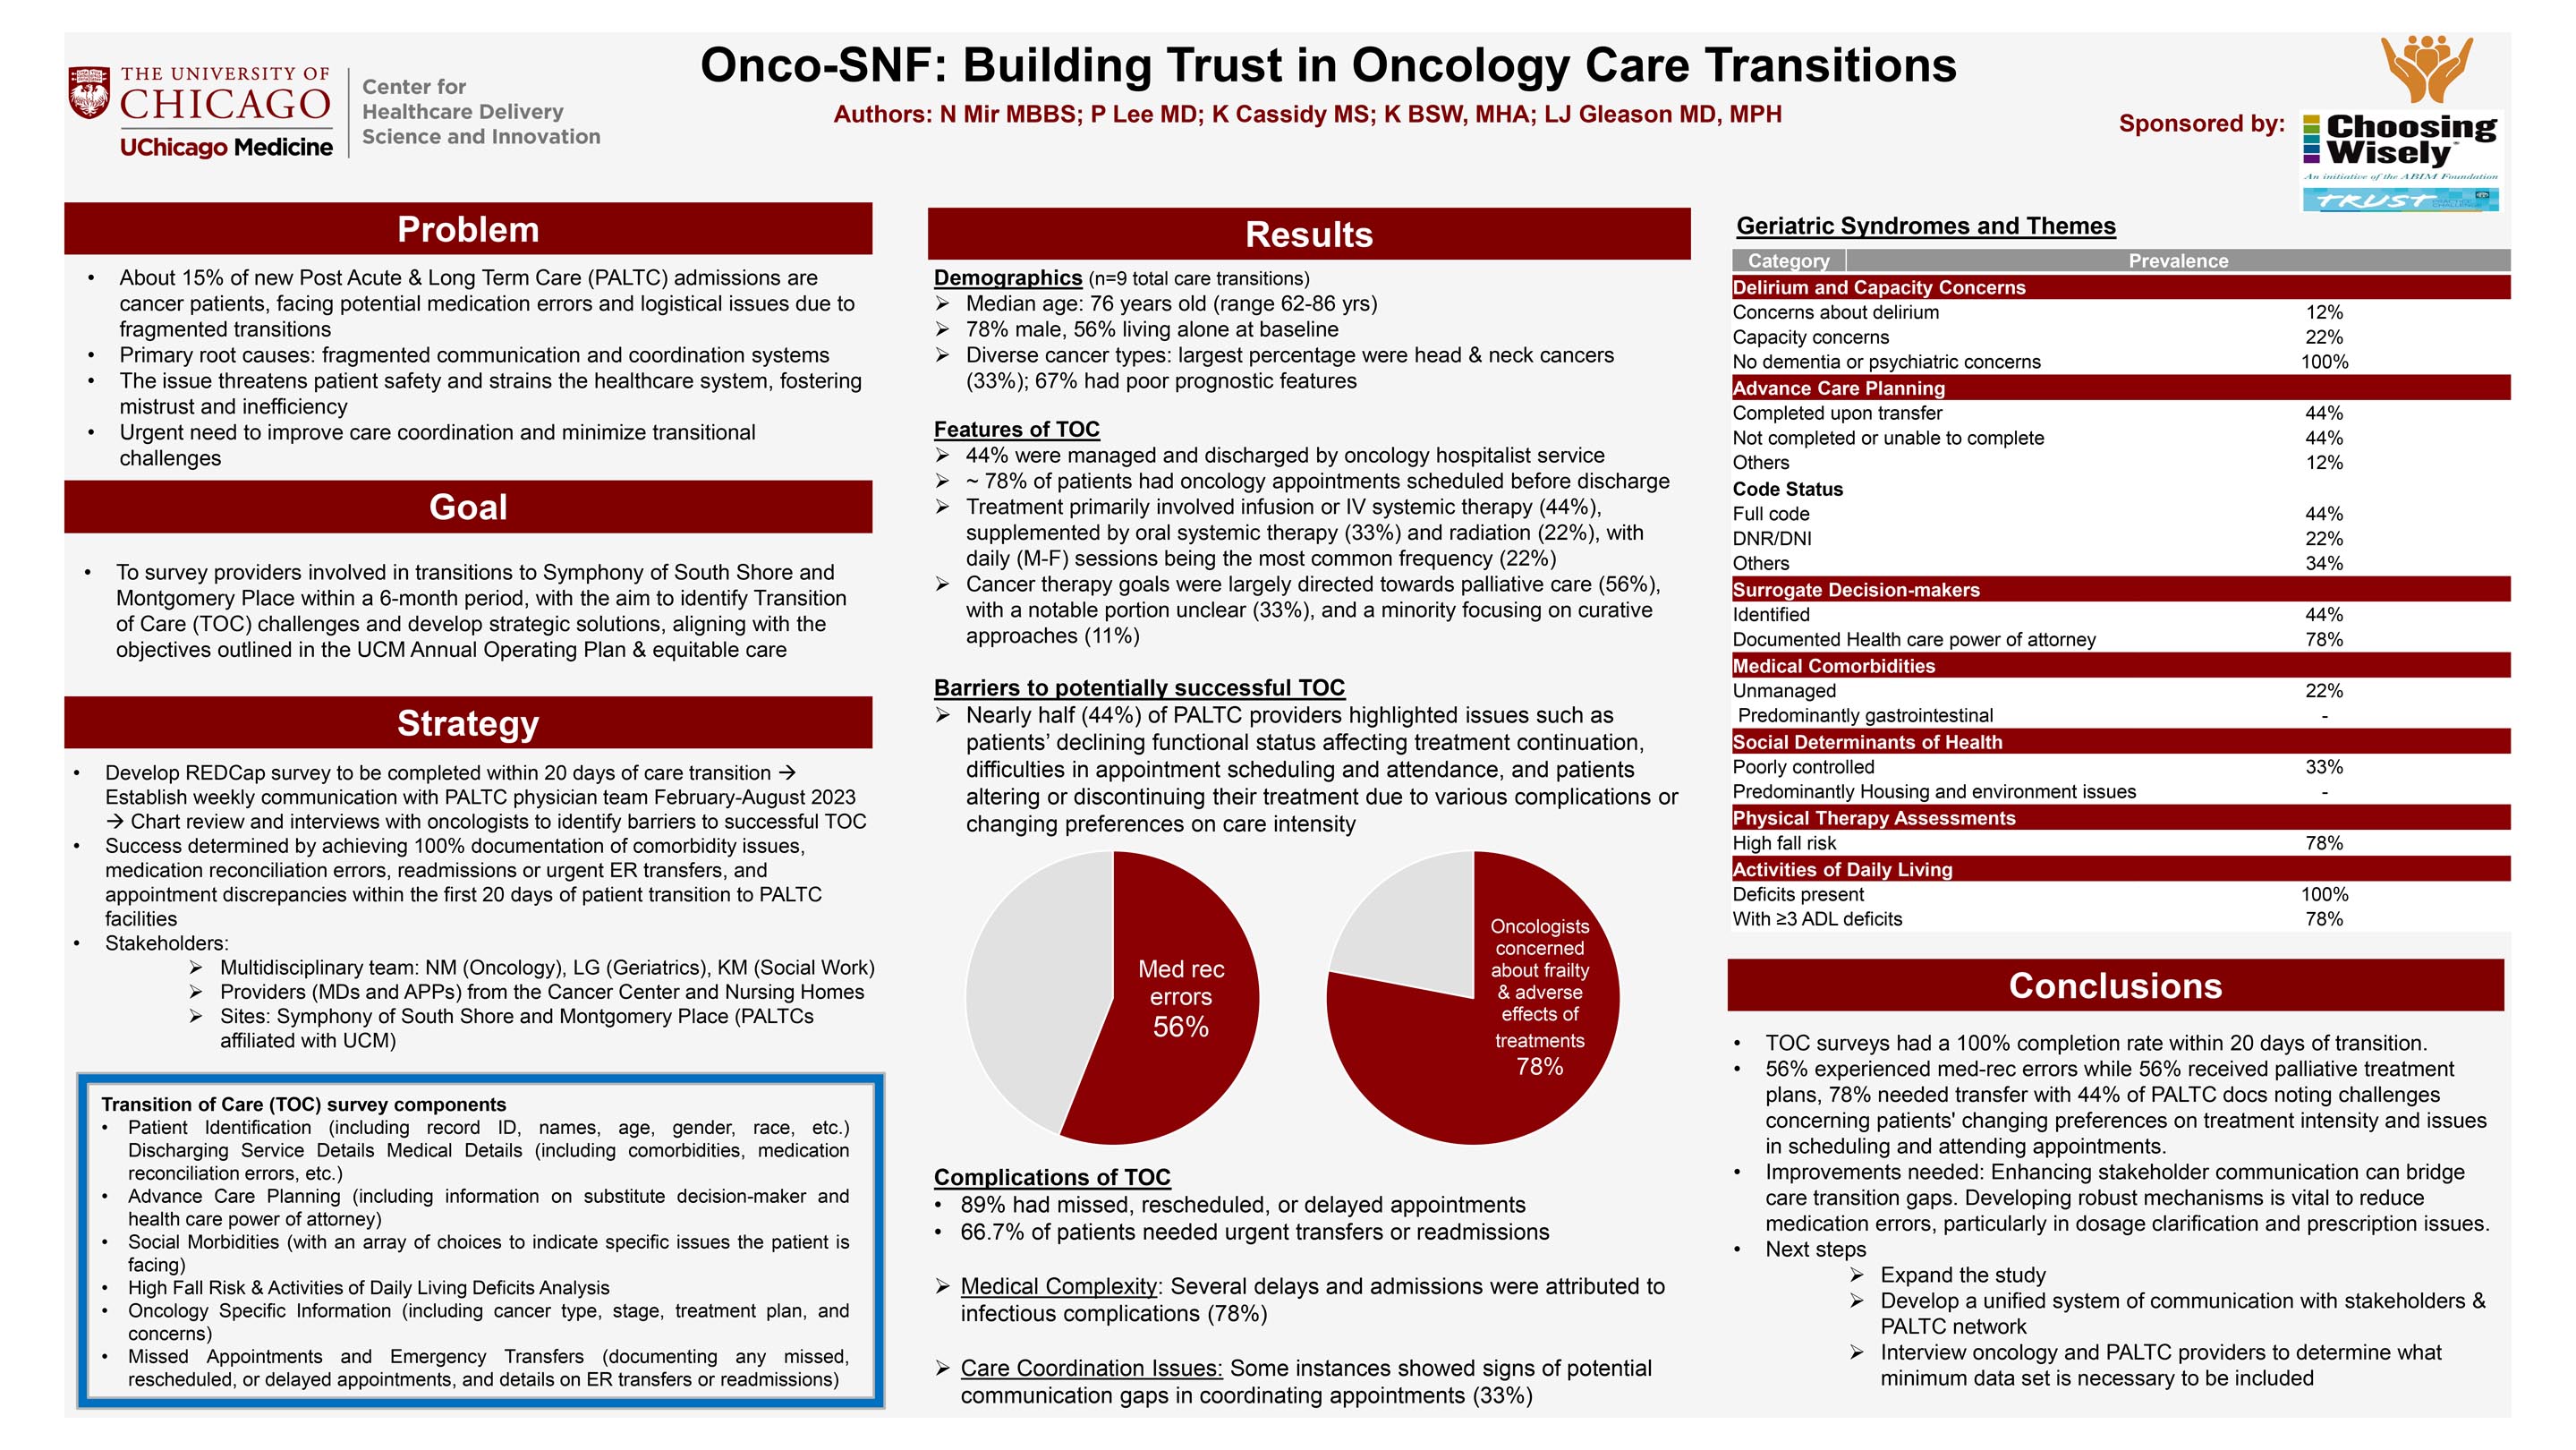 MIR_Onco-SNF - Building Trust in Oncology Care Transitions